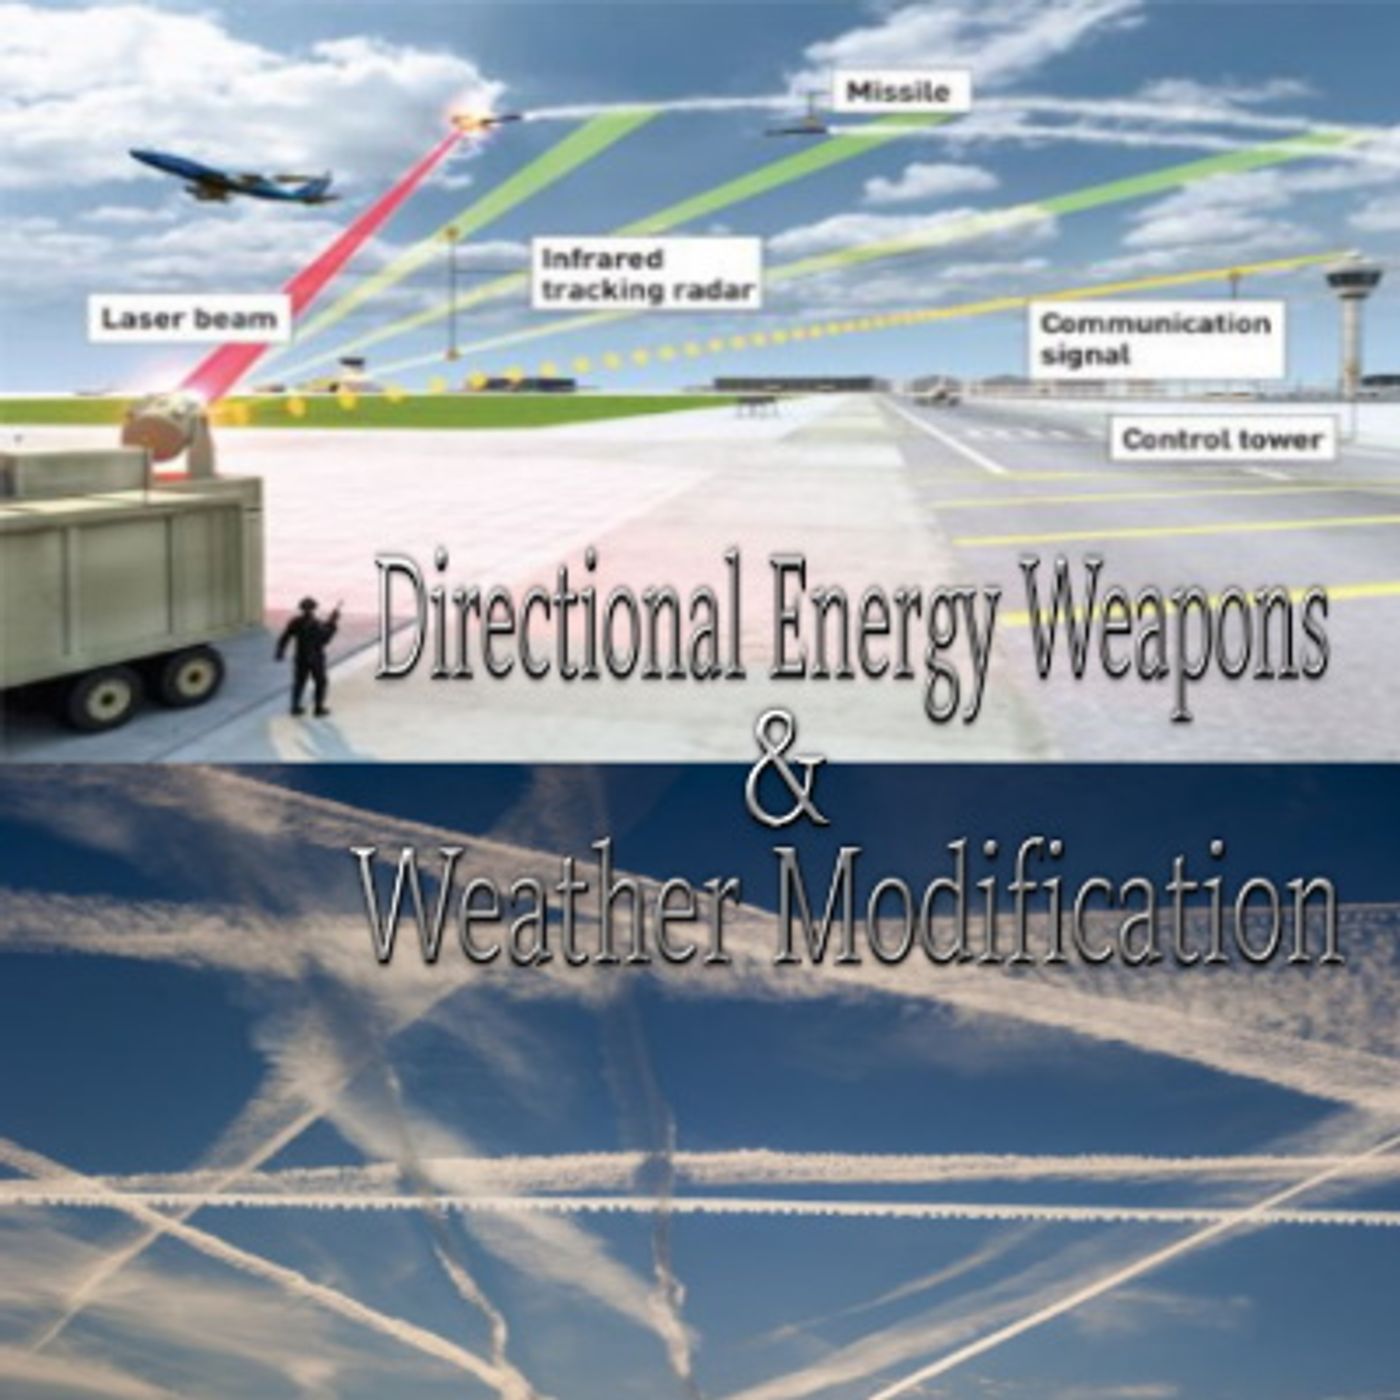 Rebroadcast Directional Energy Weapons and Weather Modification